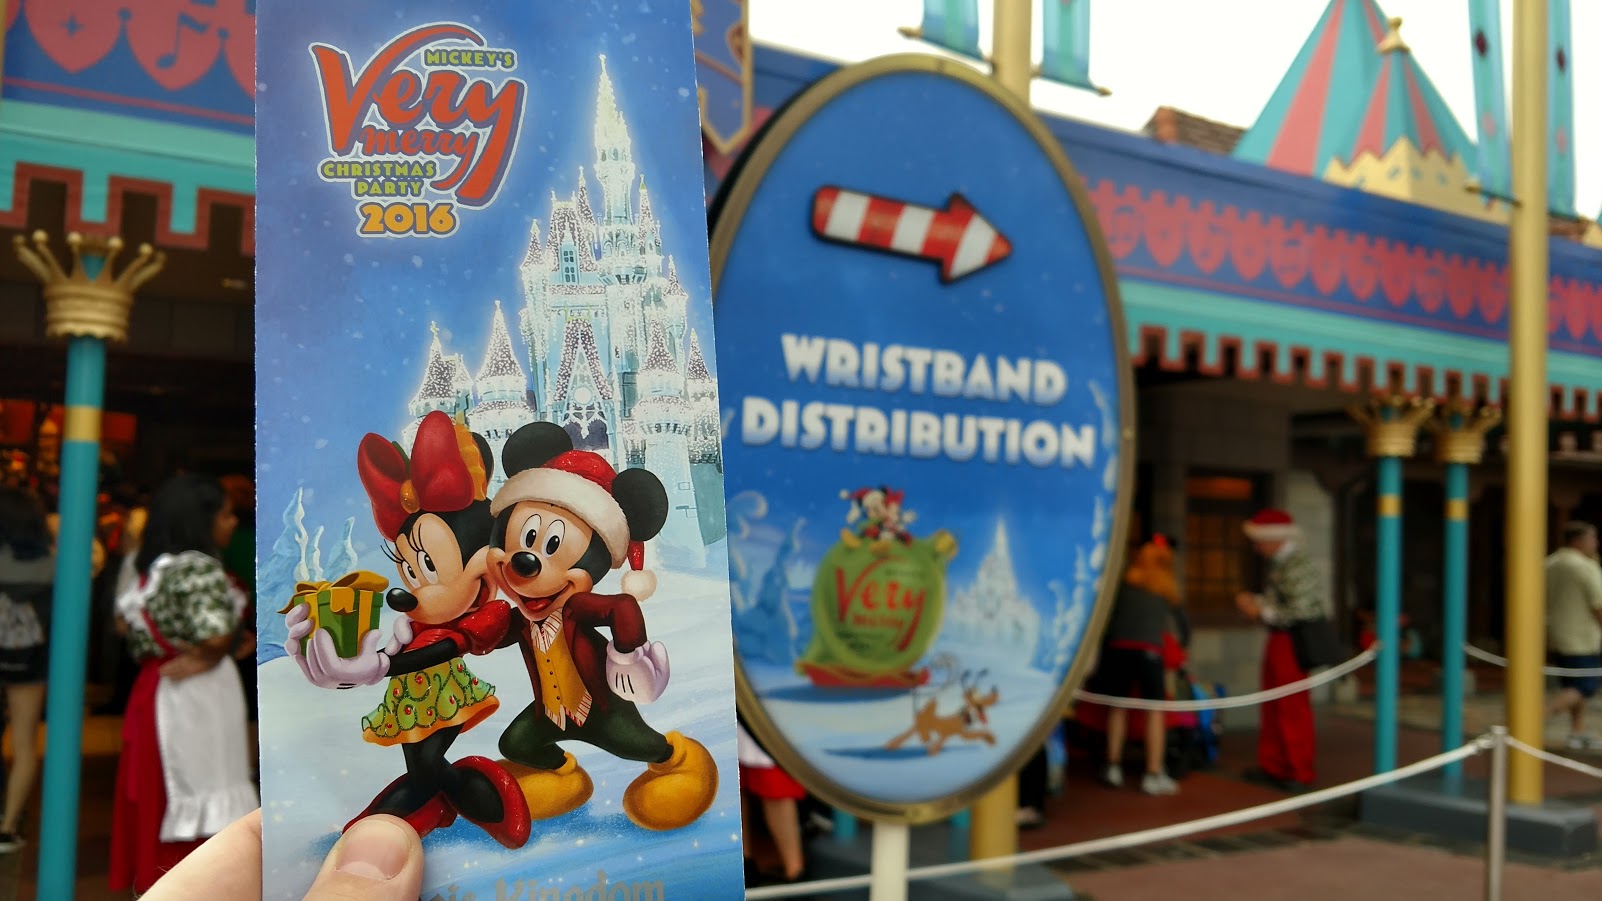 Remaining Mickey’s Very Merry Christmas Parties are now sold out